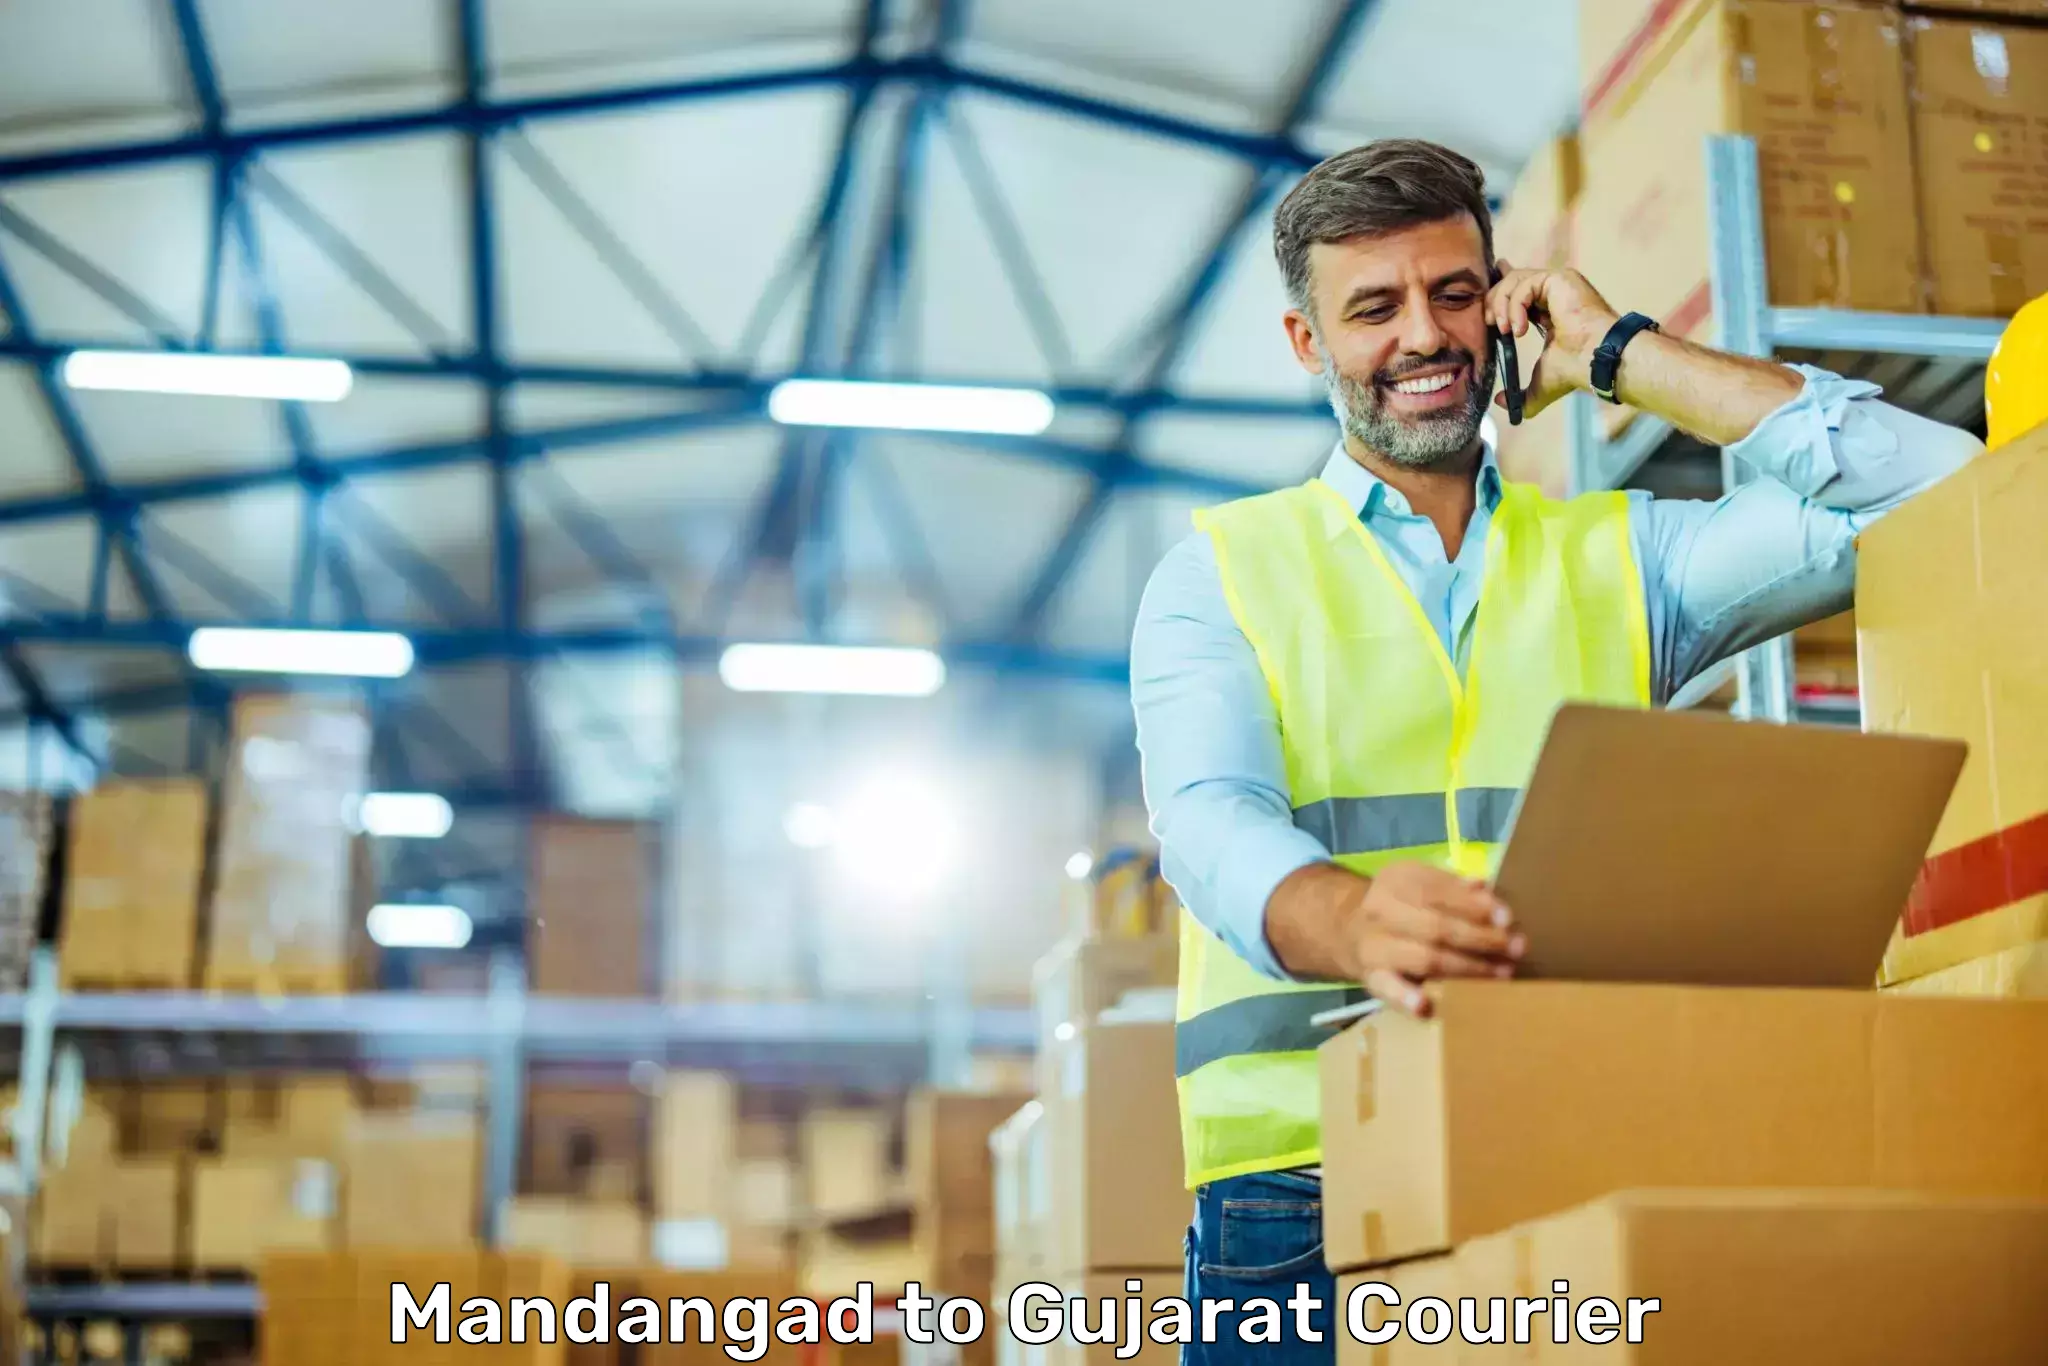 Reliable delivery network Mandangad to Anand